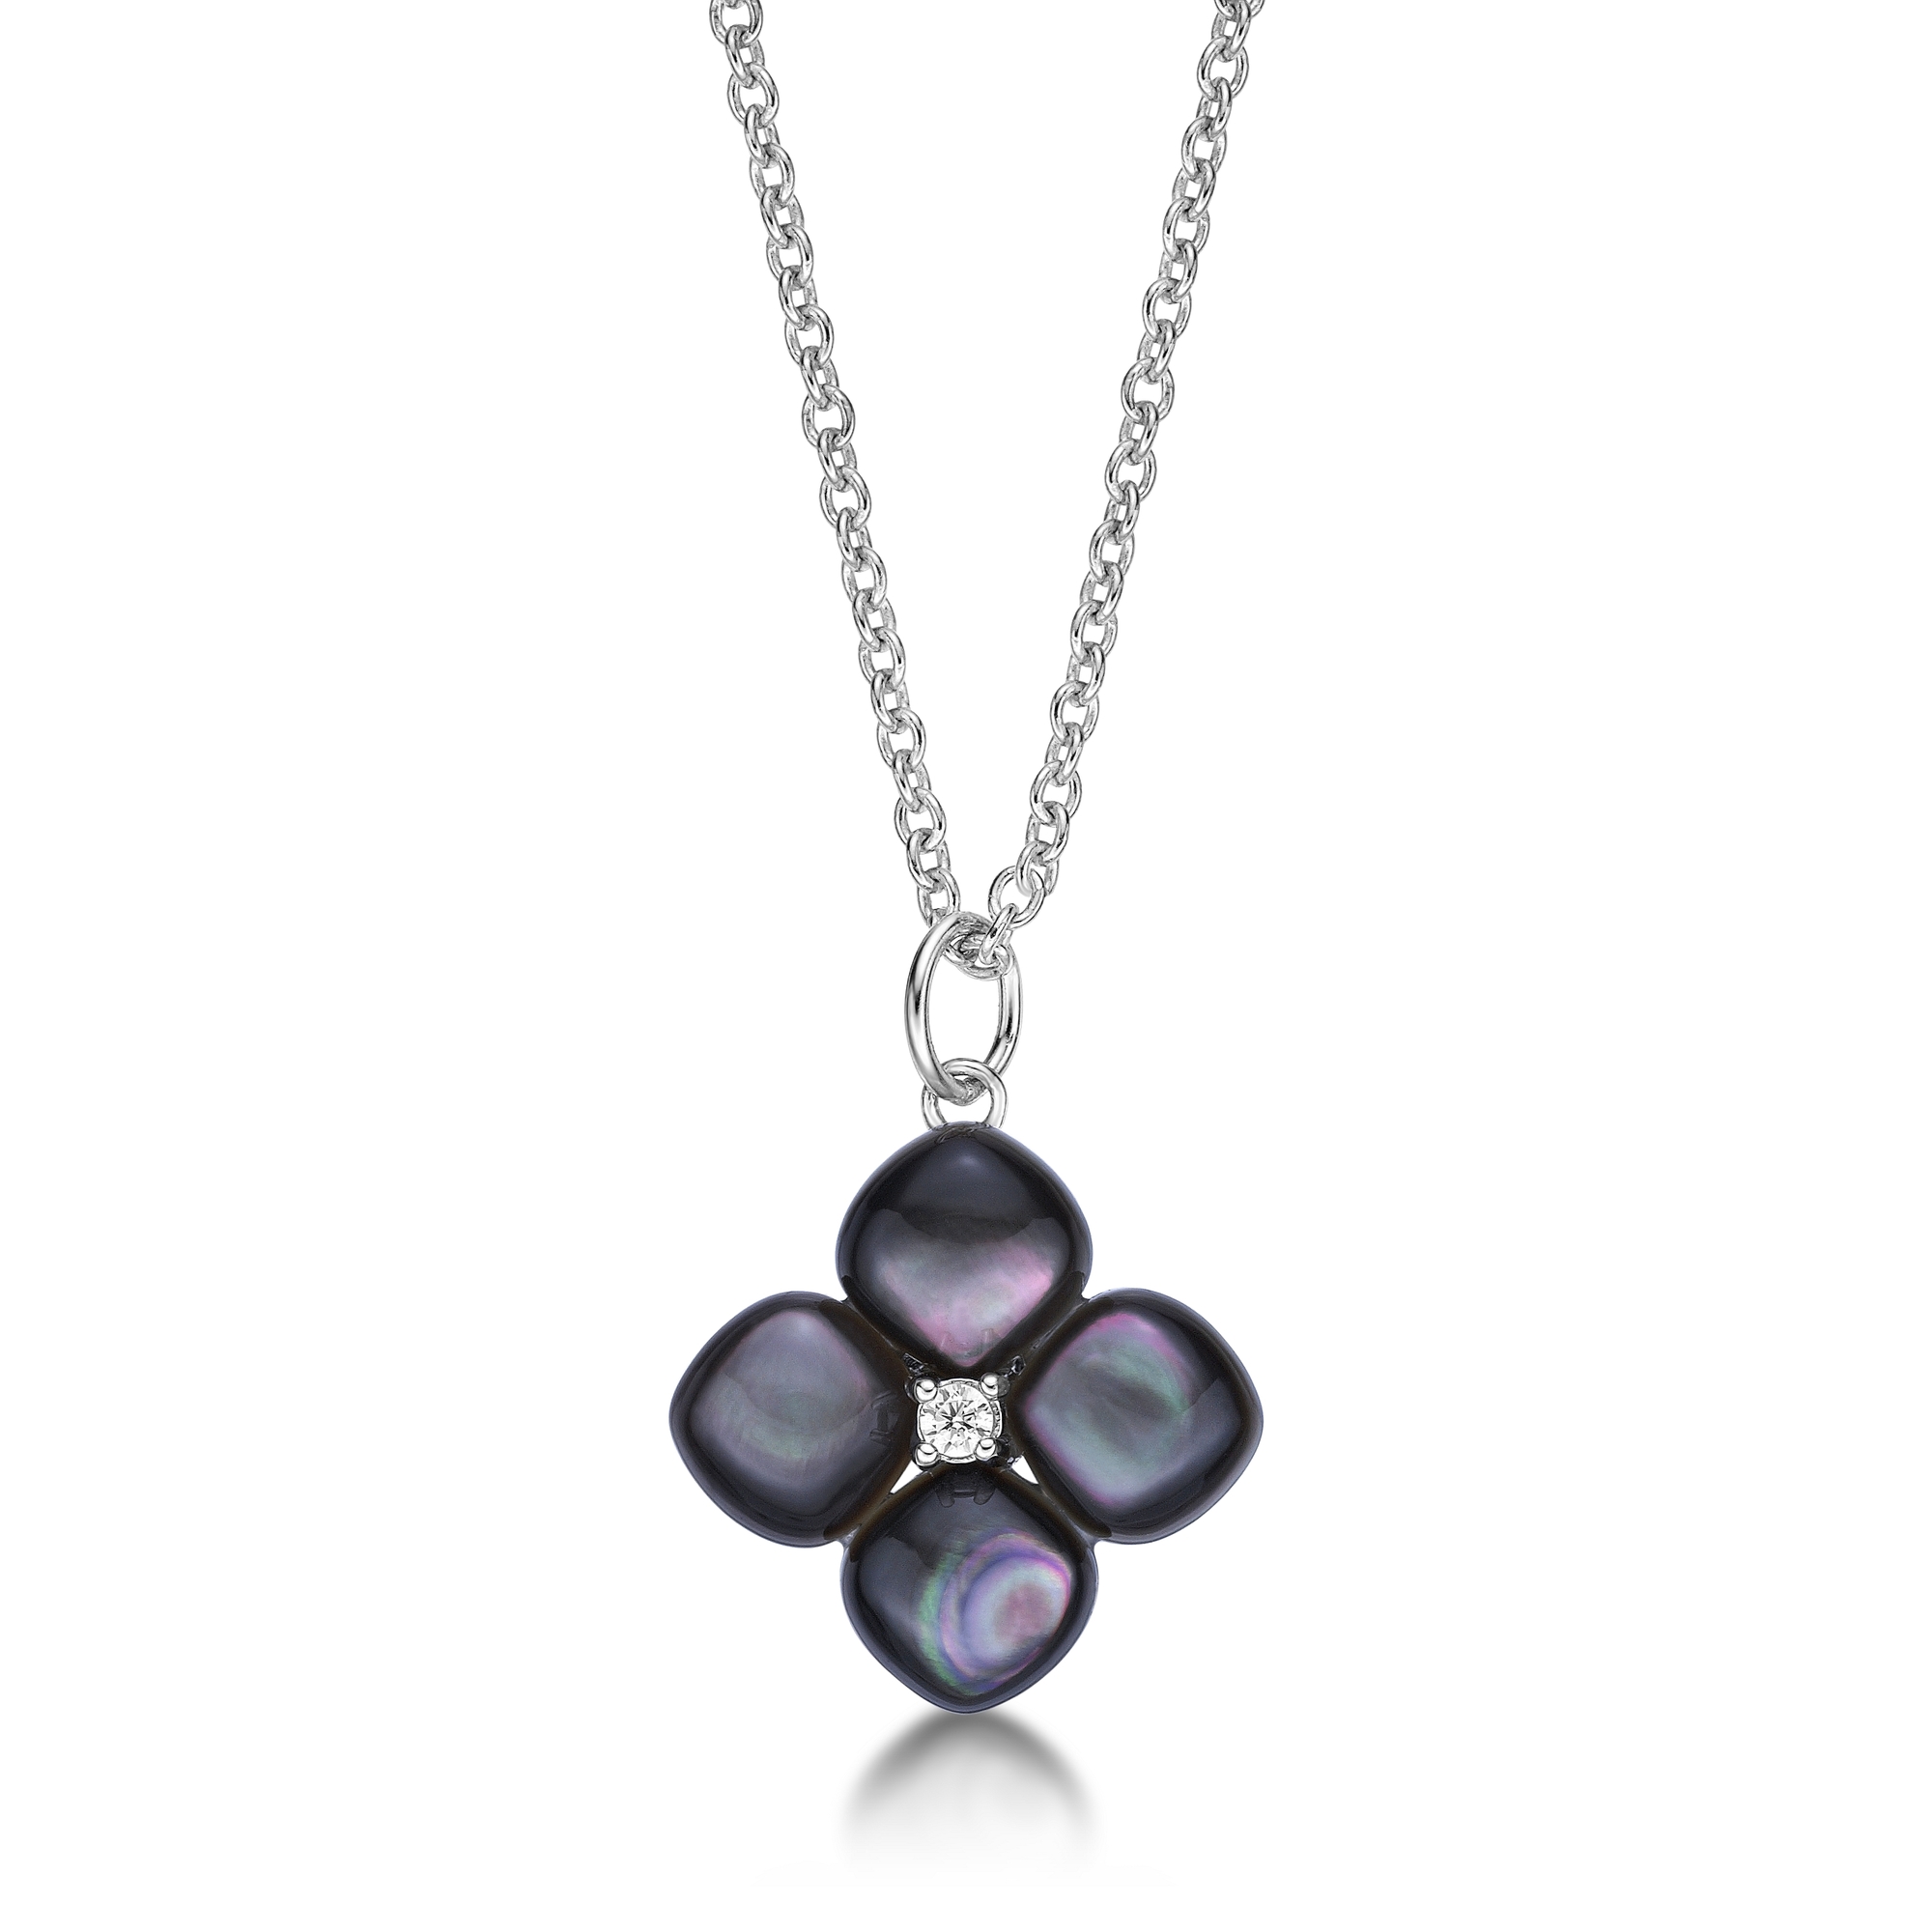 Women's Black Mother of Pearl Flower Pendant Necklace in 925 Sterling Silver with Cubic Zirconia - 18 Inch Adjustable Cable Chain - Flora | Lavari Jewelers